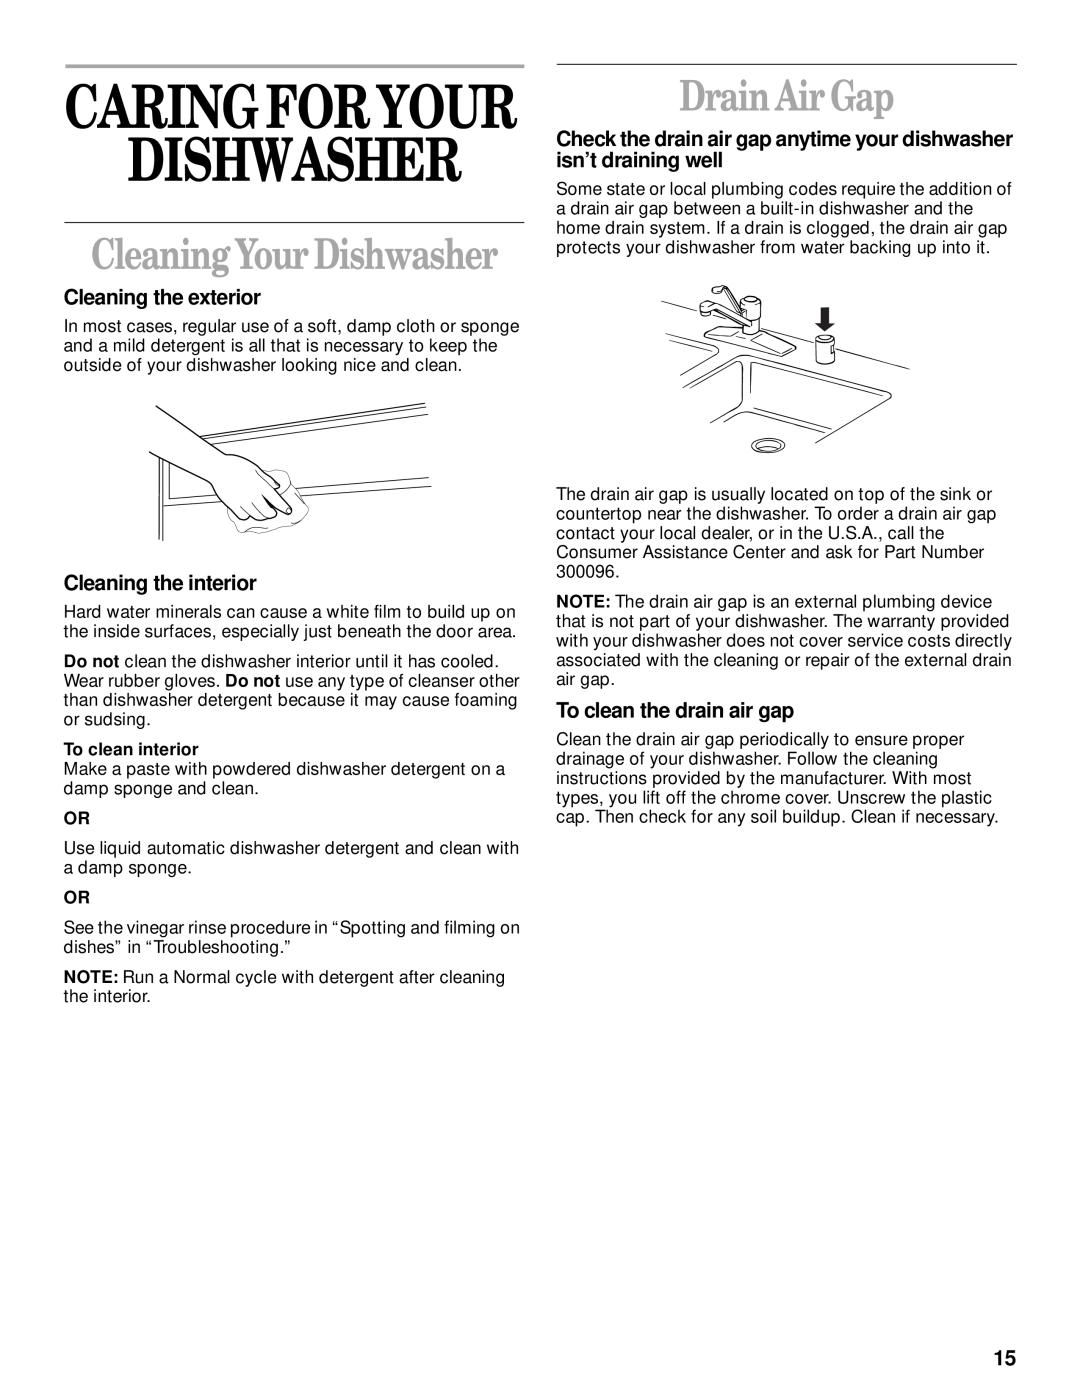 Whirlpool DU912 8051563 Caringforyour, DrainAir Gap, CleaningYourDishwasher, Cleaning the exterior, Cleaning the interior 